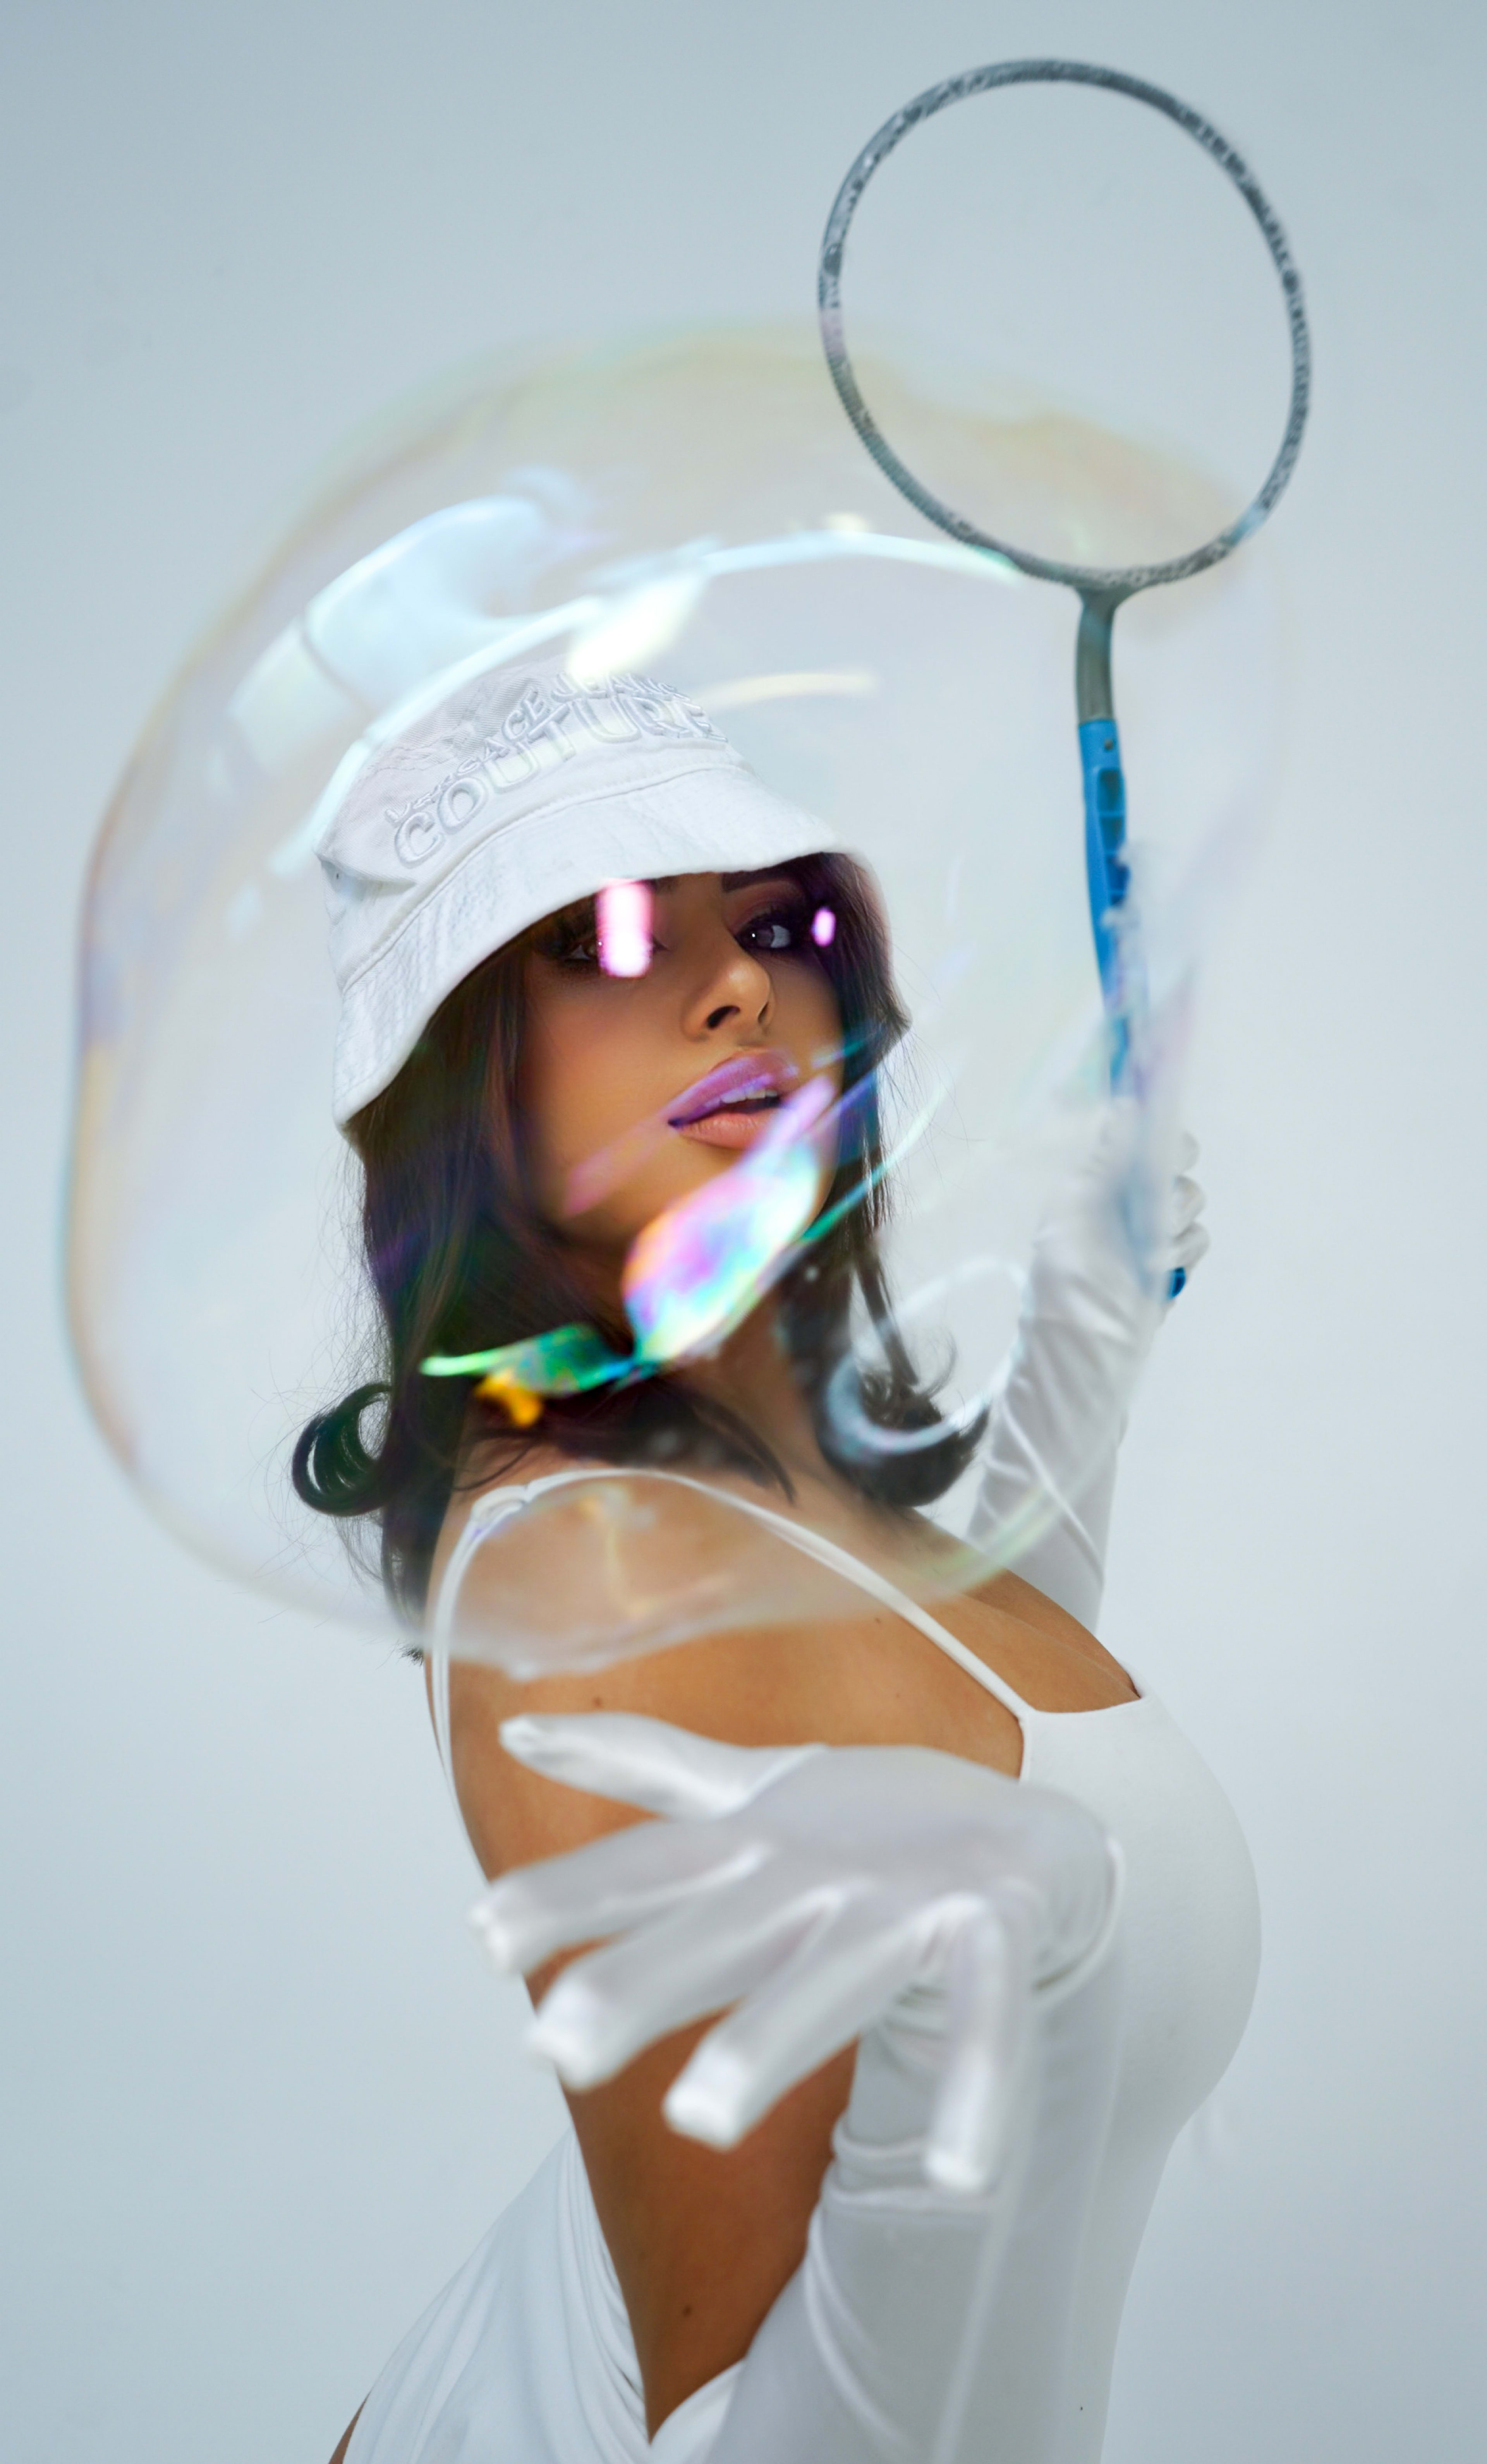 A fashion photoshoot featuring a woman in a white dress and holding big bubble wand.